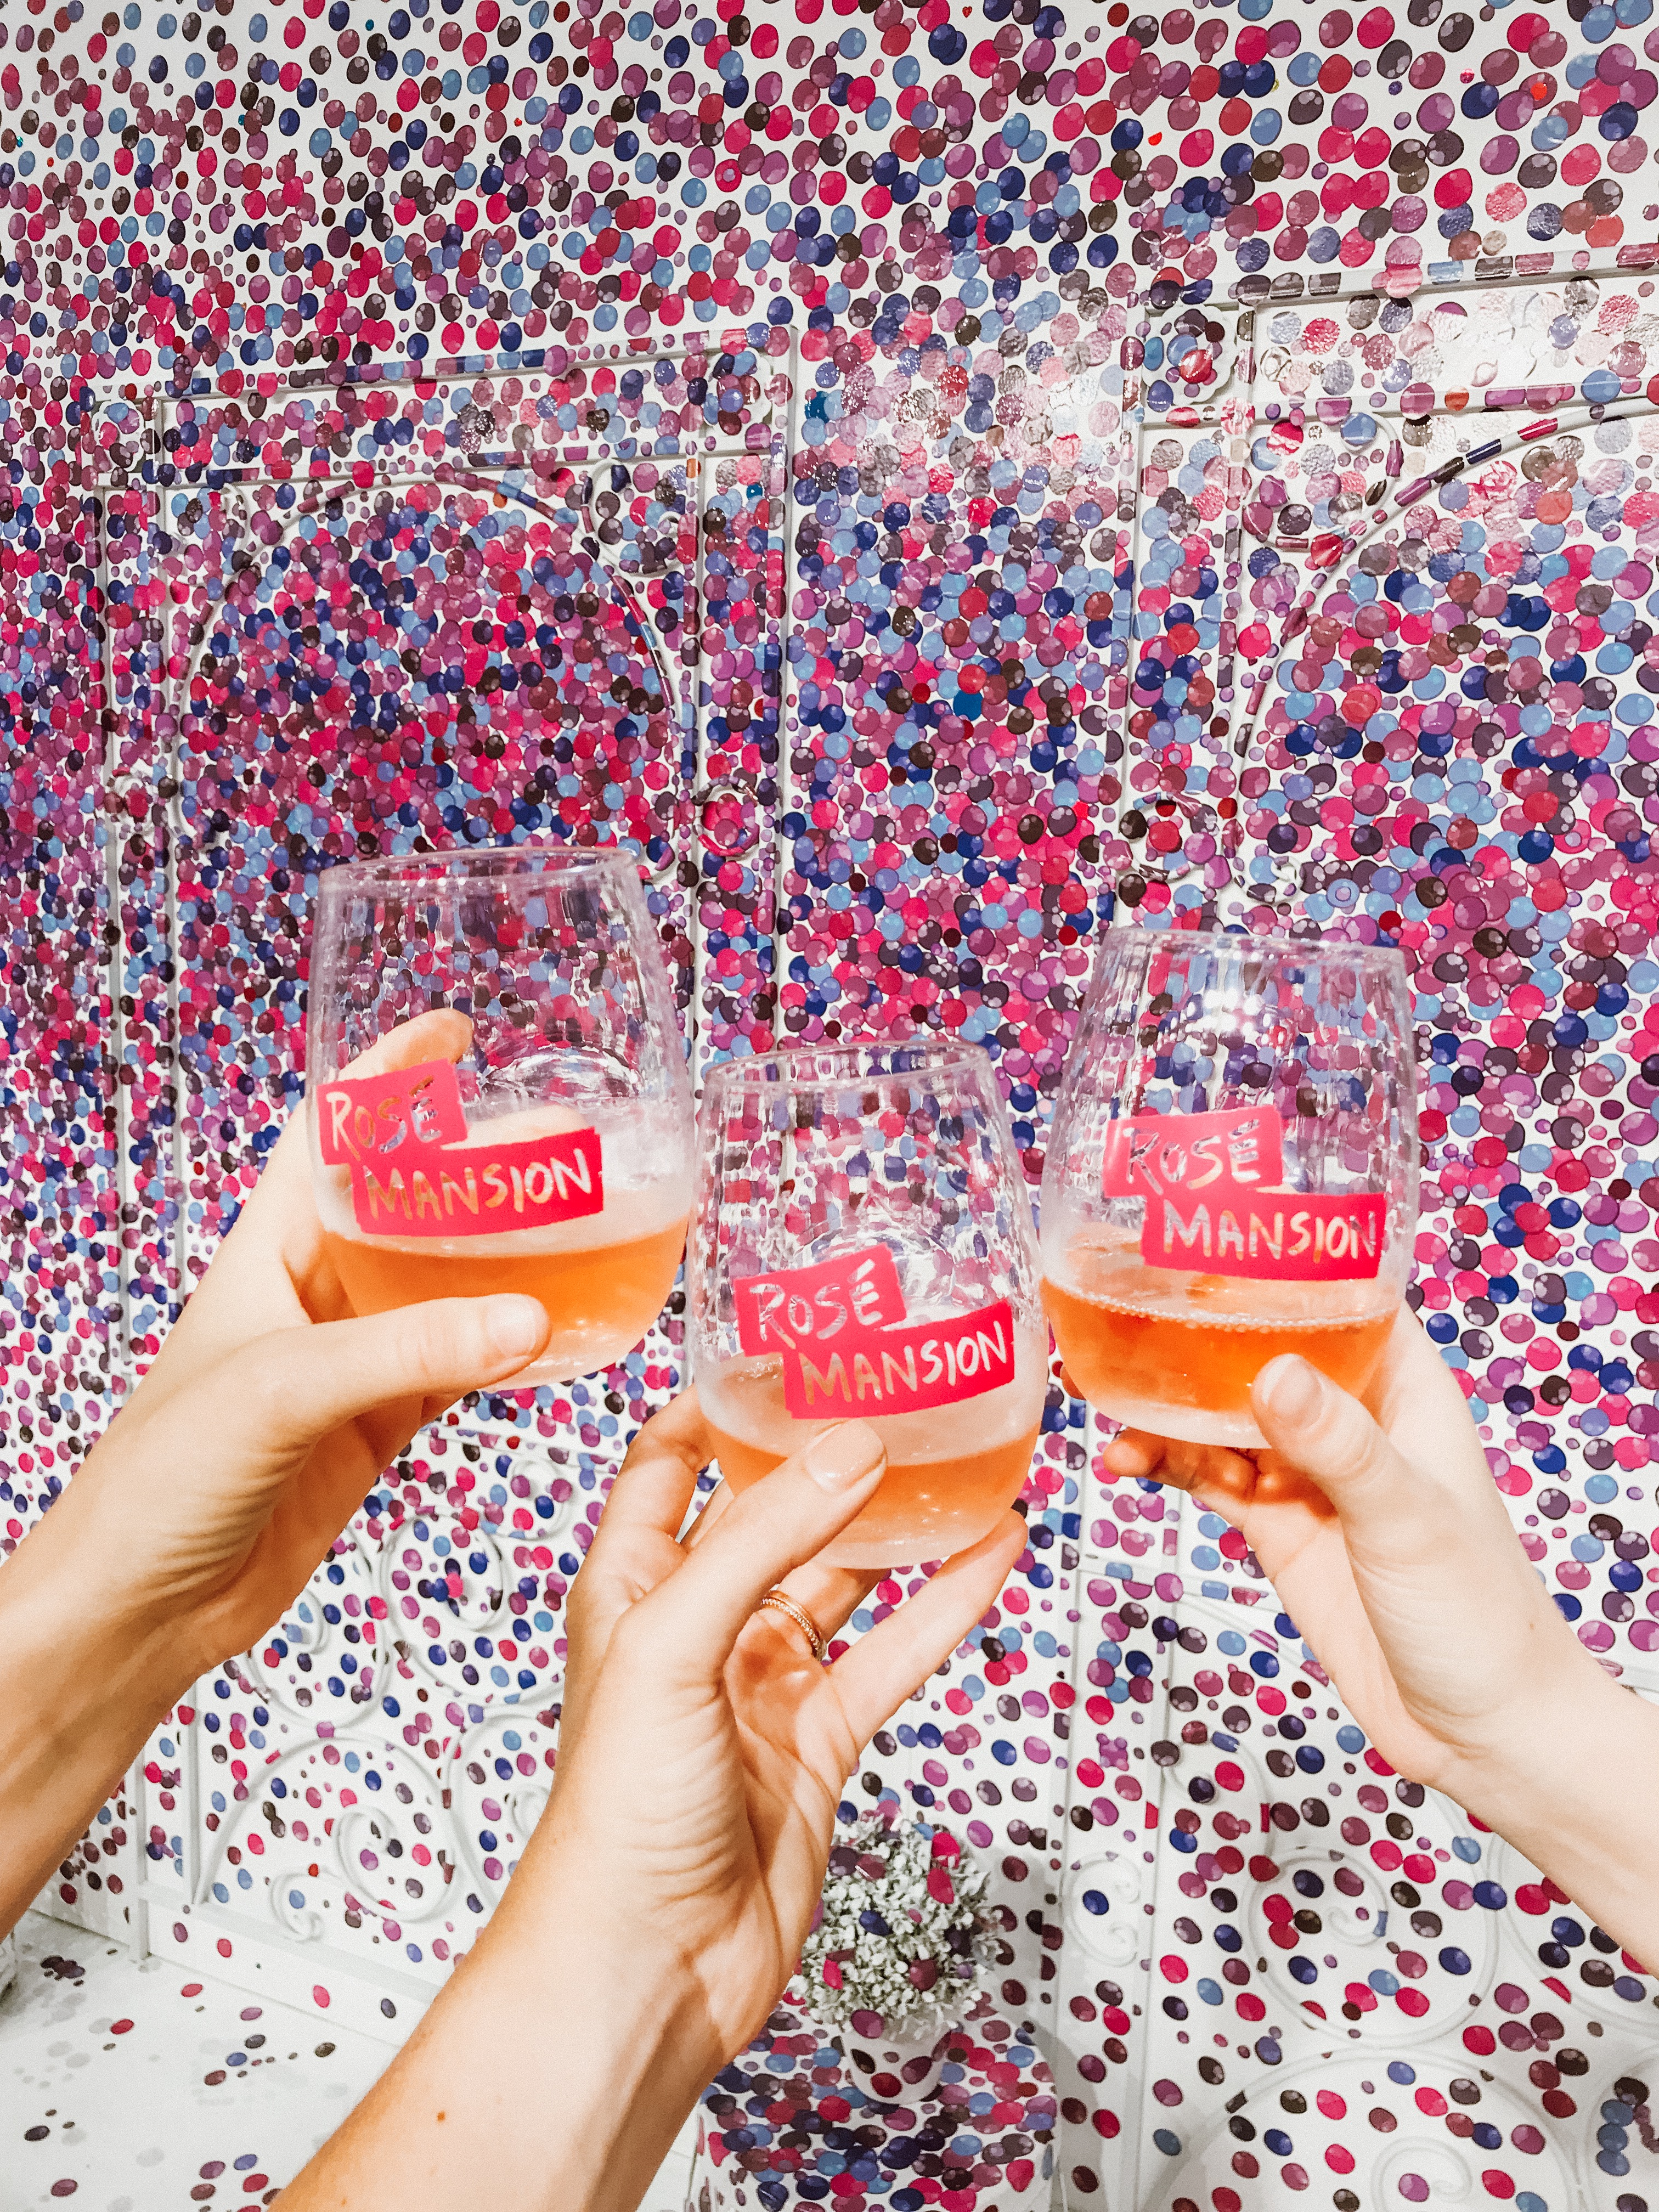 New York's Rosé Mansion Is Exactly the Dystopian Instagram Trap You'd